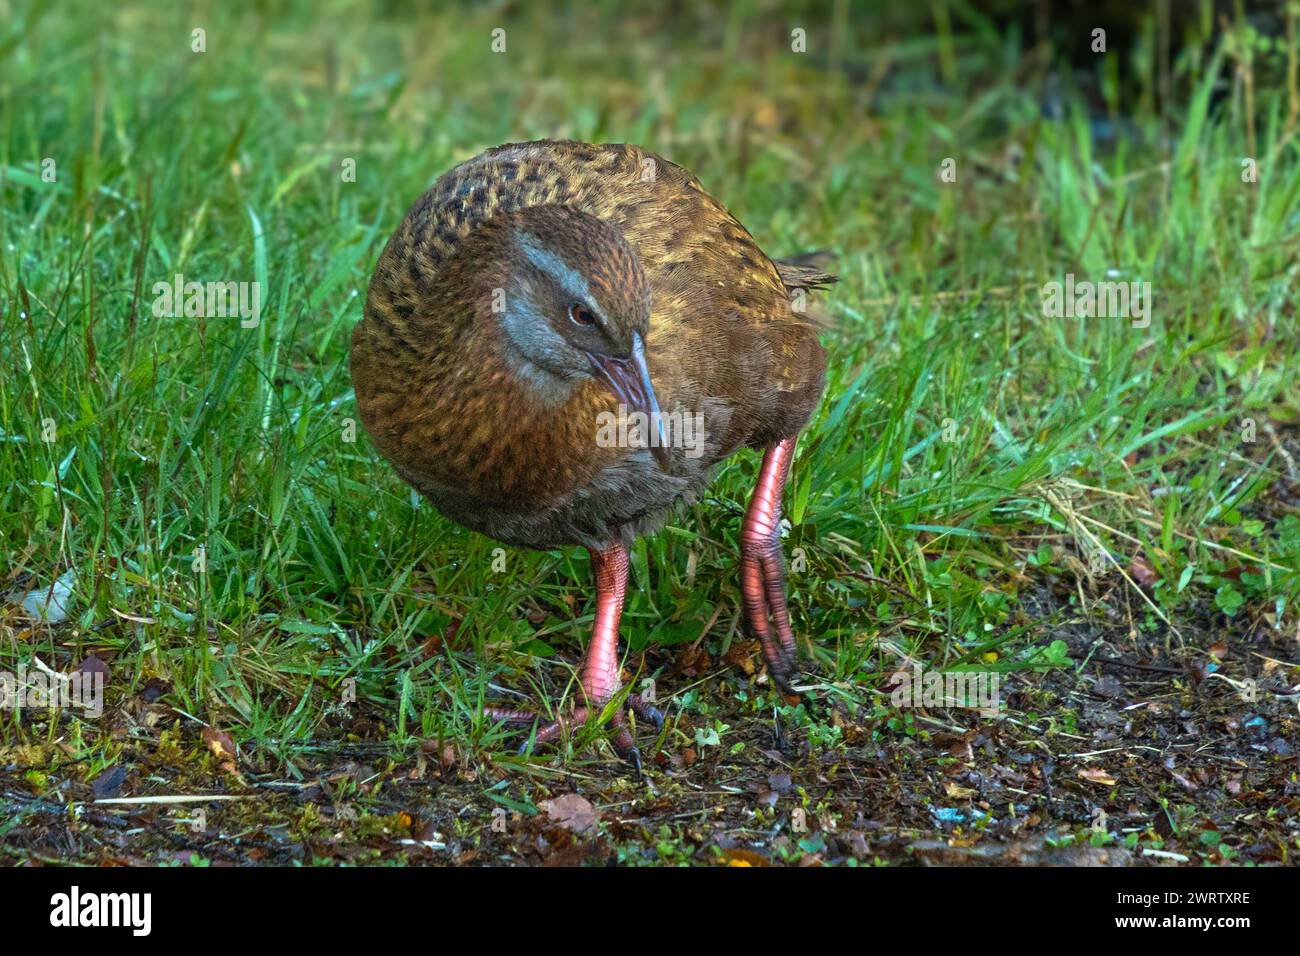 A weka (Gallirallus australis), also known as a Maori hen, or woodhen, is a flightless bird endemic to New Zealand. This one south of Milford Sound. Stock Photo